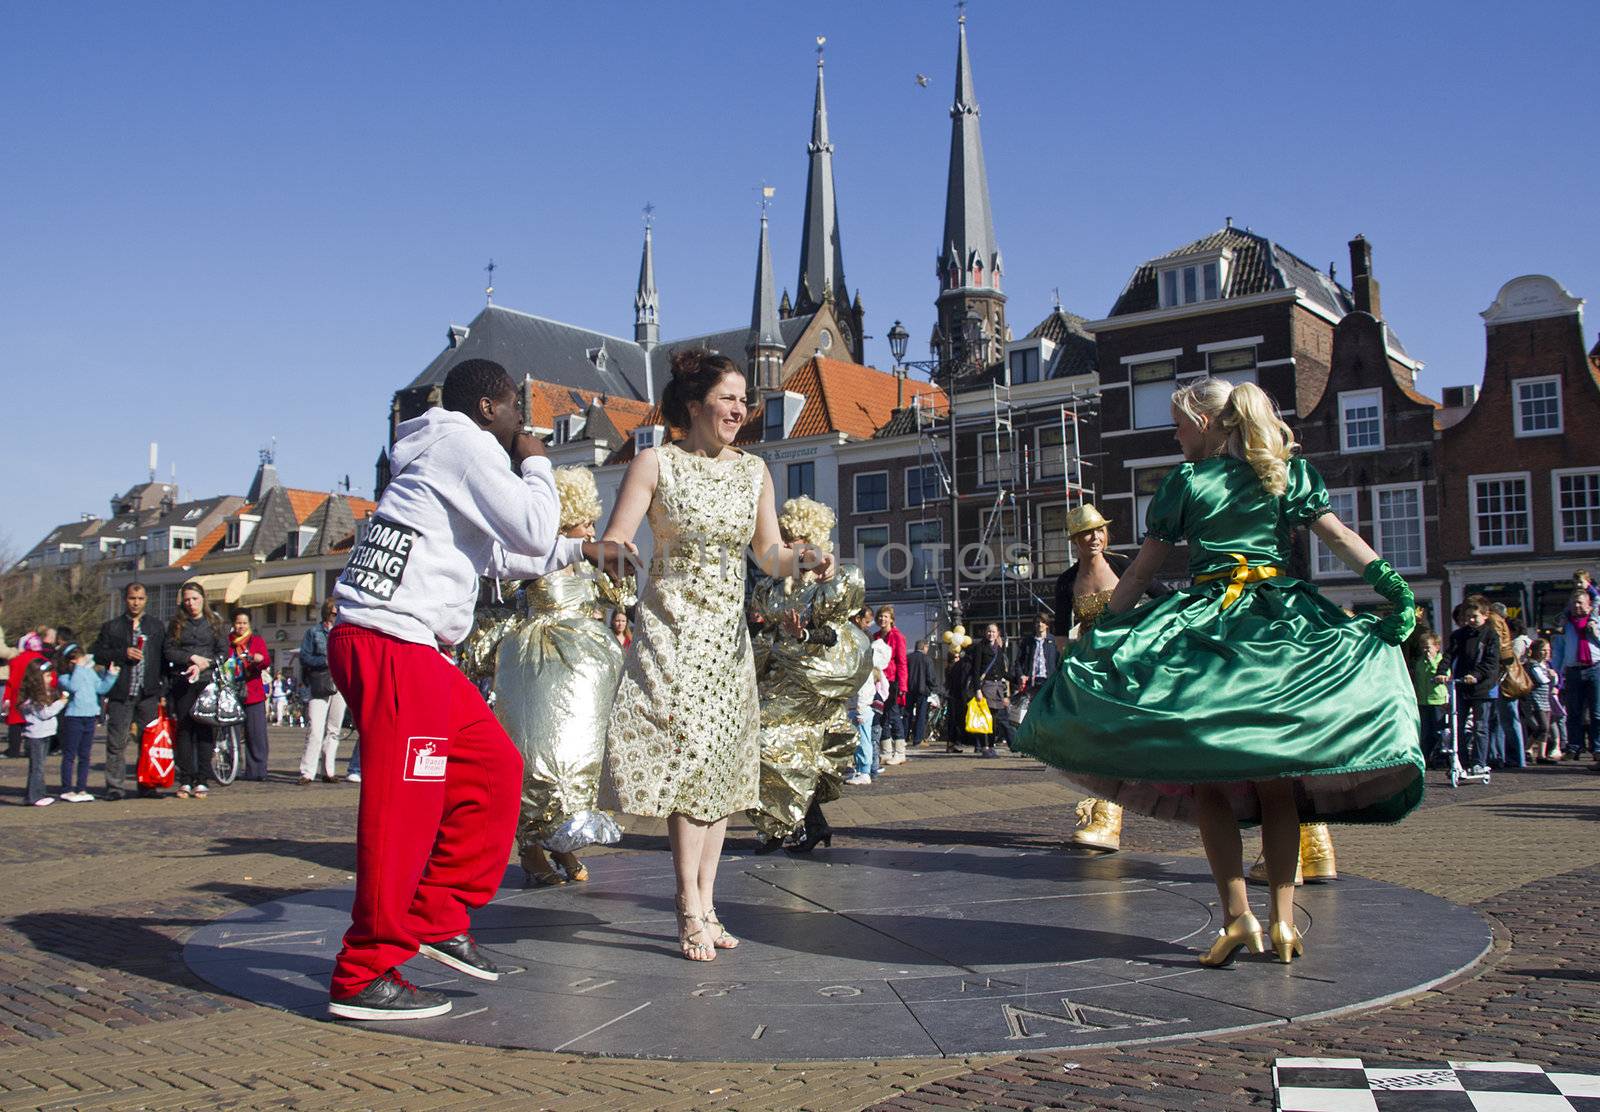 Dancing on the market square in Delft